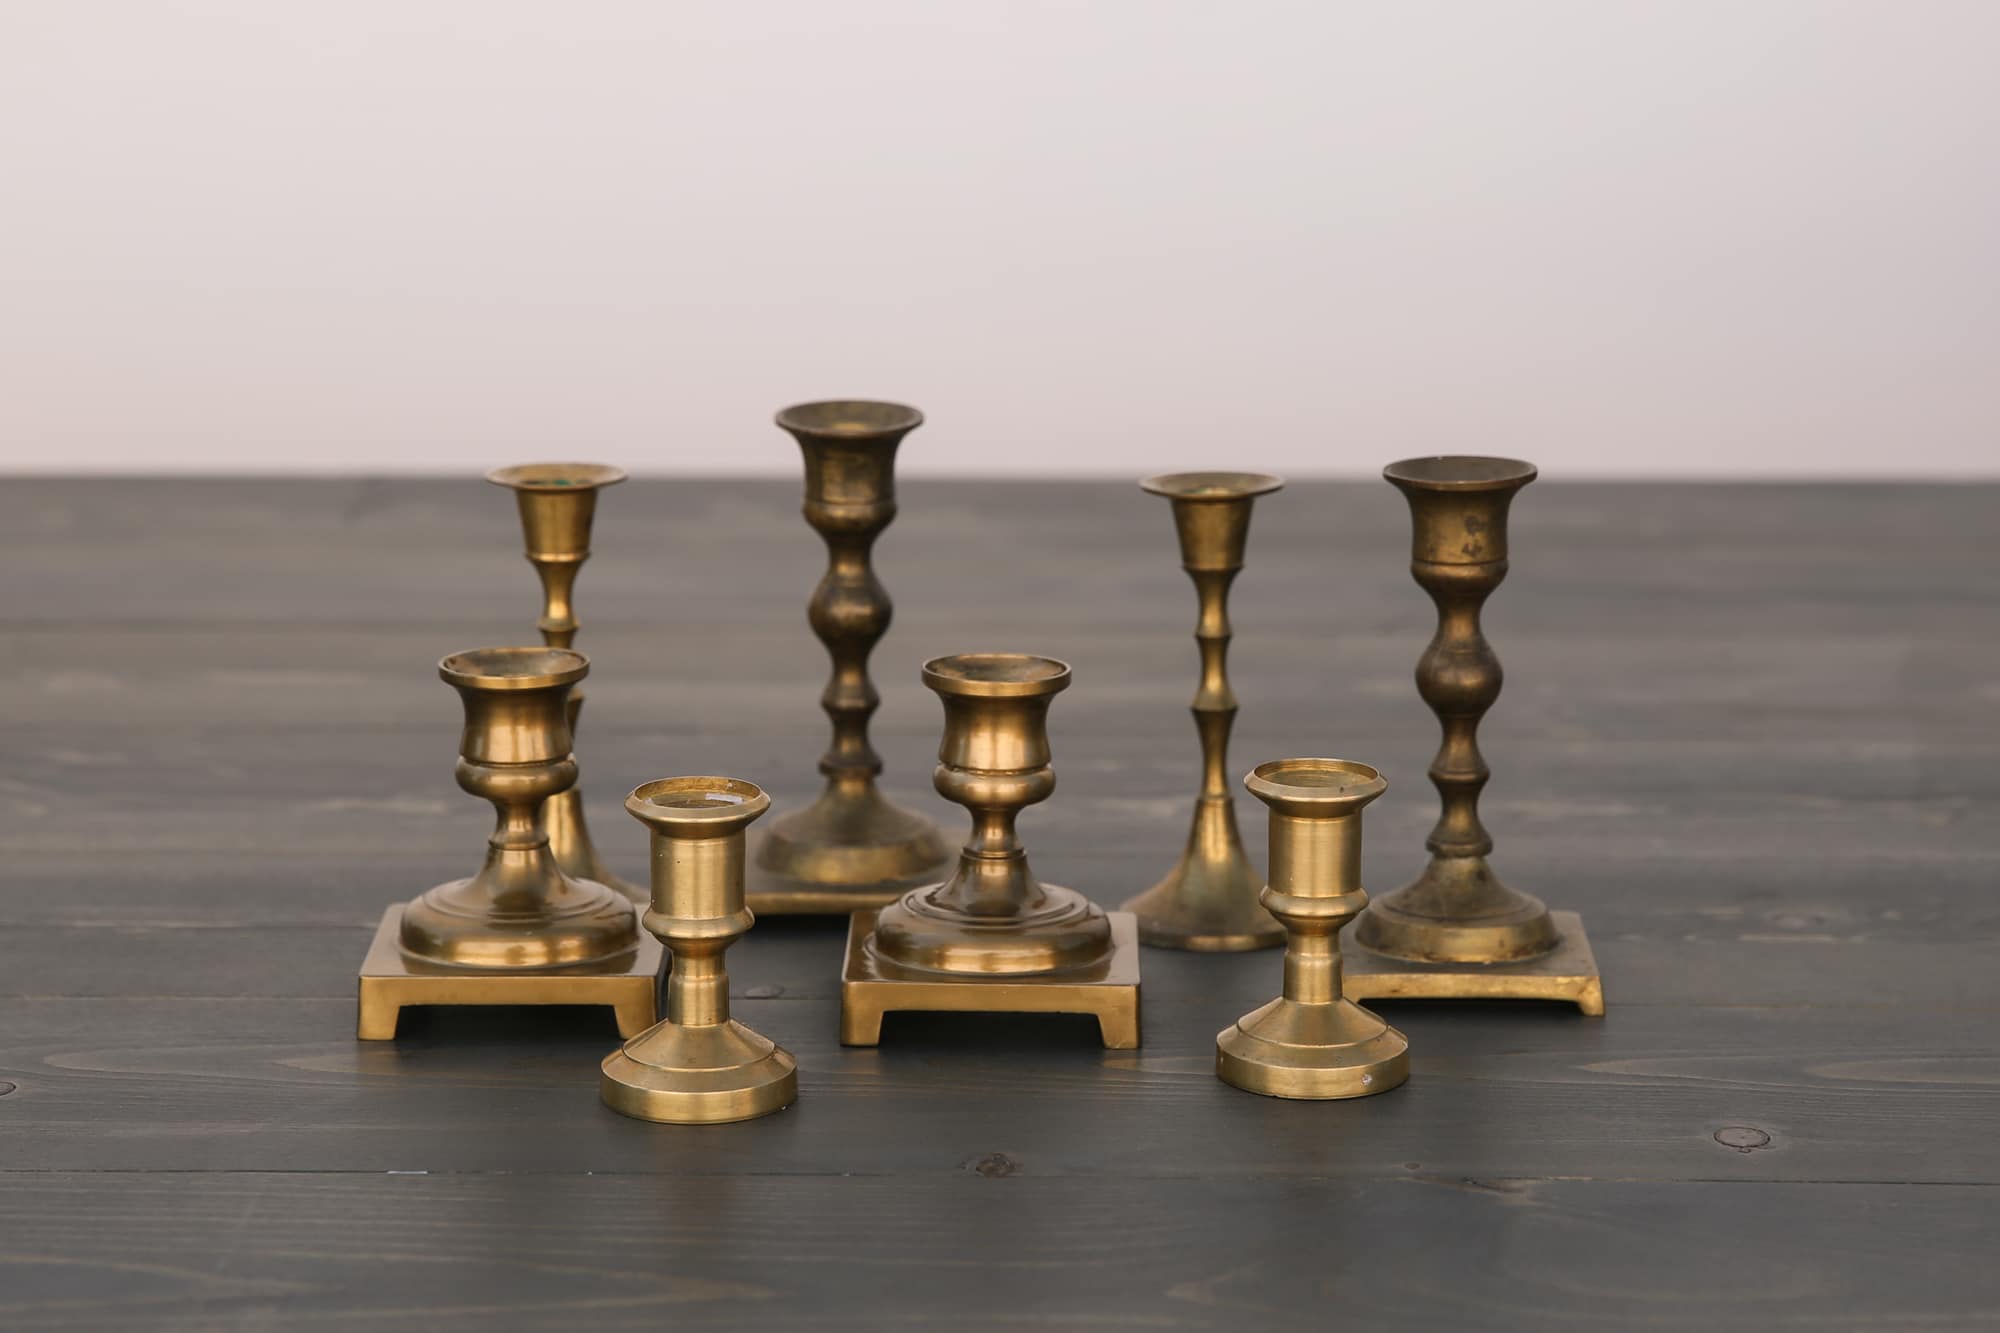 Antique Brass Candle Holders - Candles & Home Fragrances